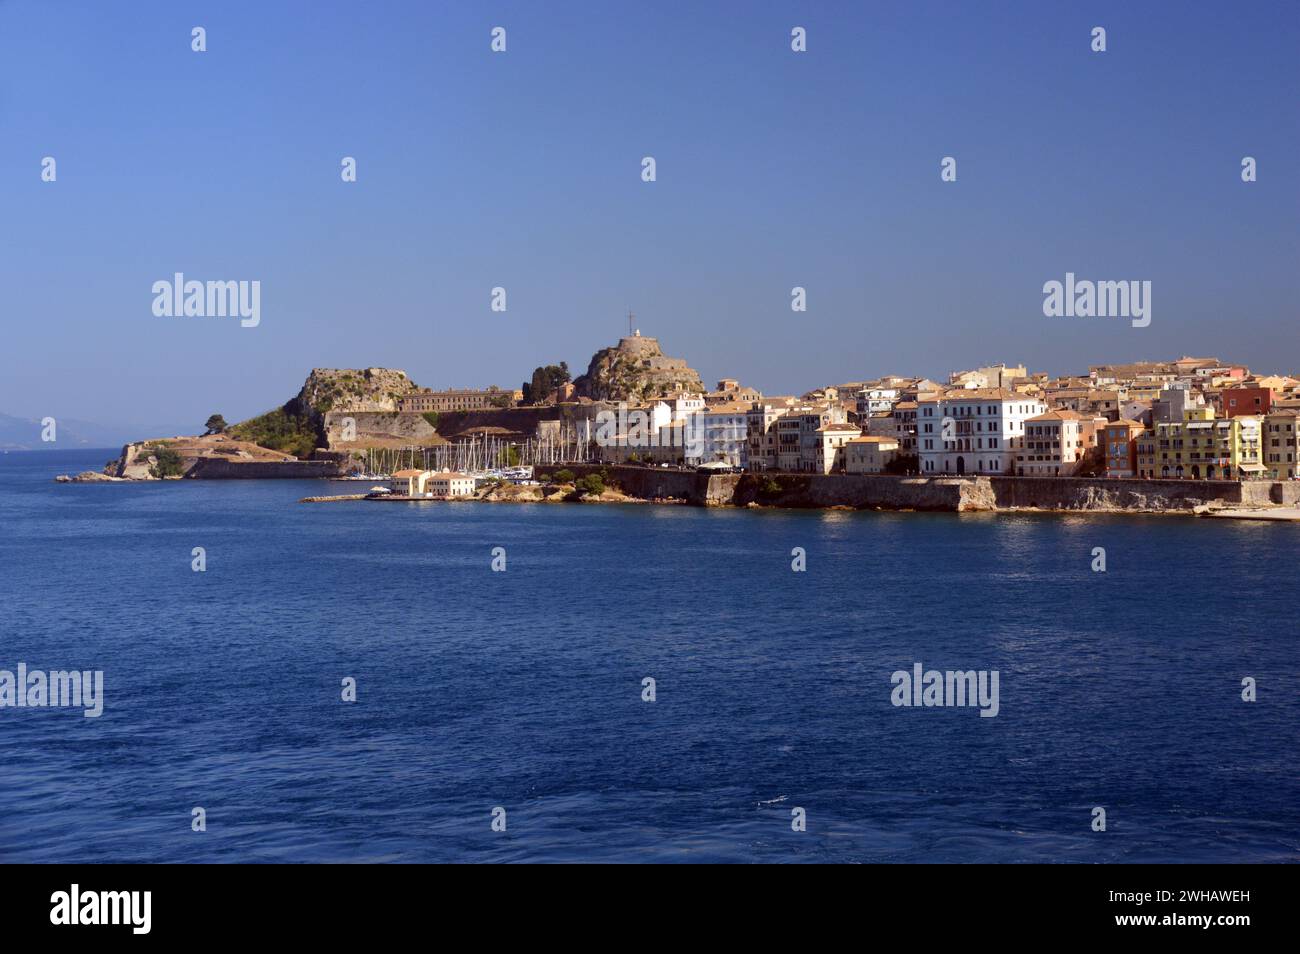 The Old and New Fortresses by the Buildings and Houses on the Seafront in Corfu Town from the Sea, Greece, EU. Stock Photo